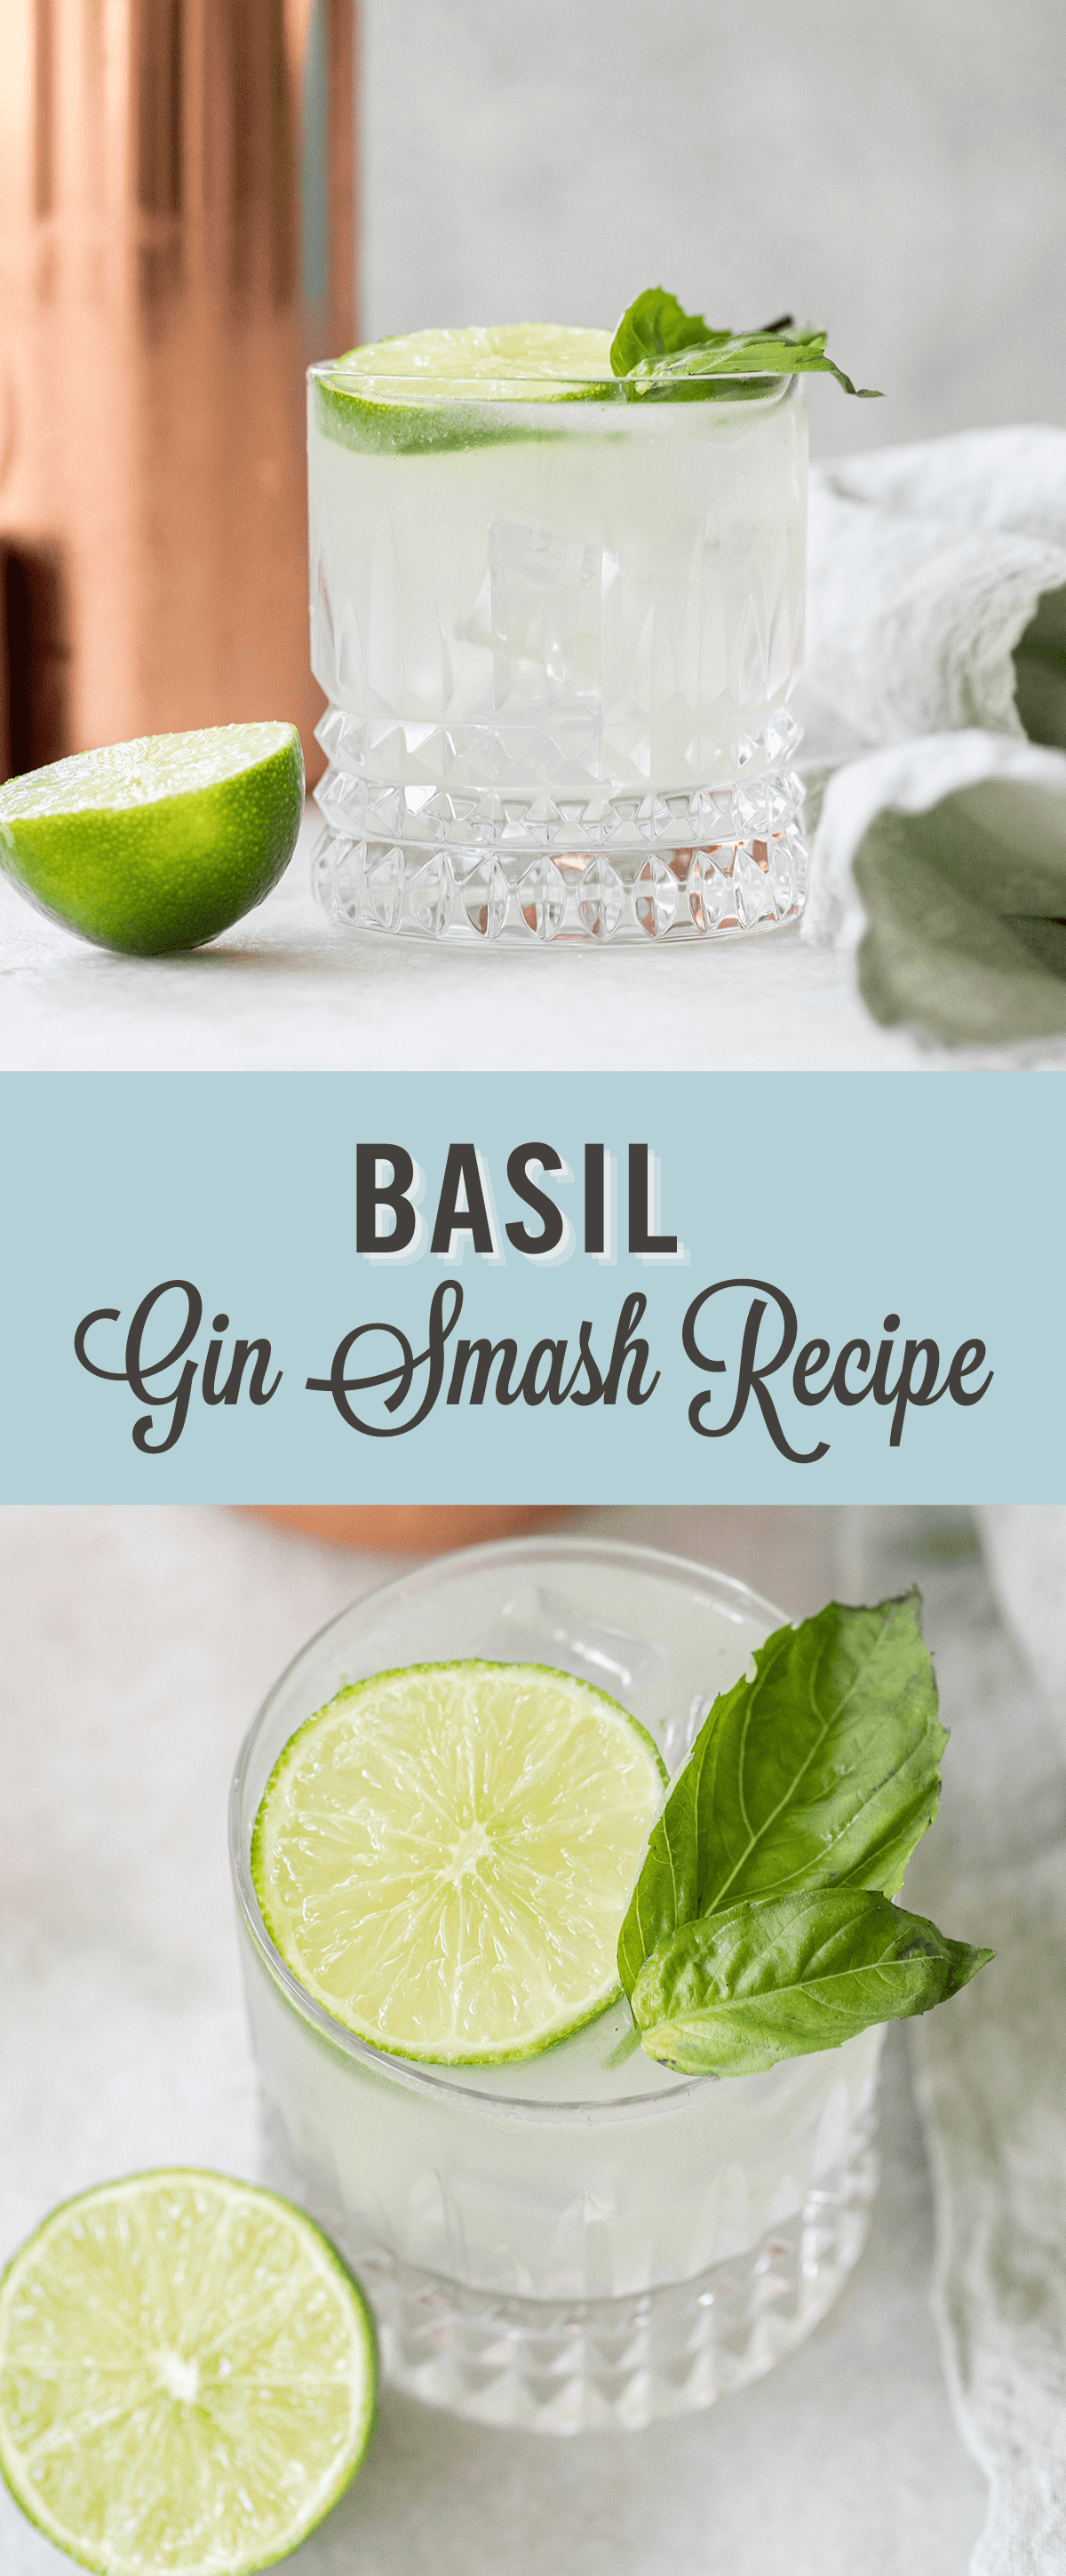 basil gin smash recipe with text.